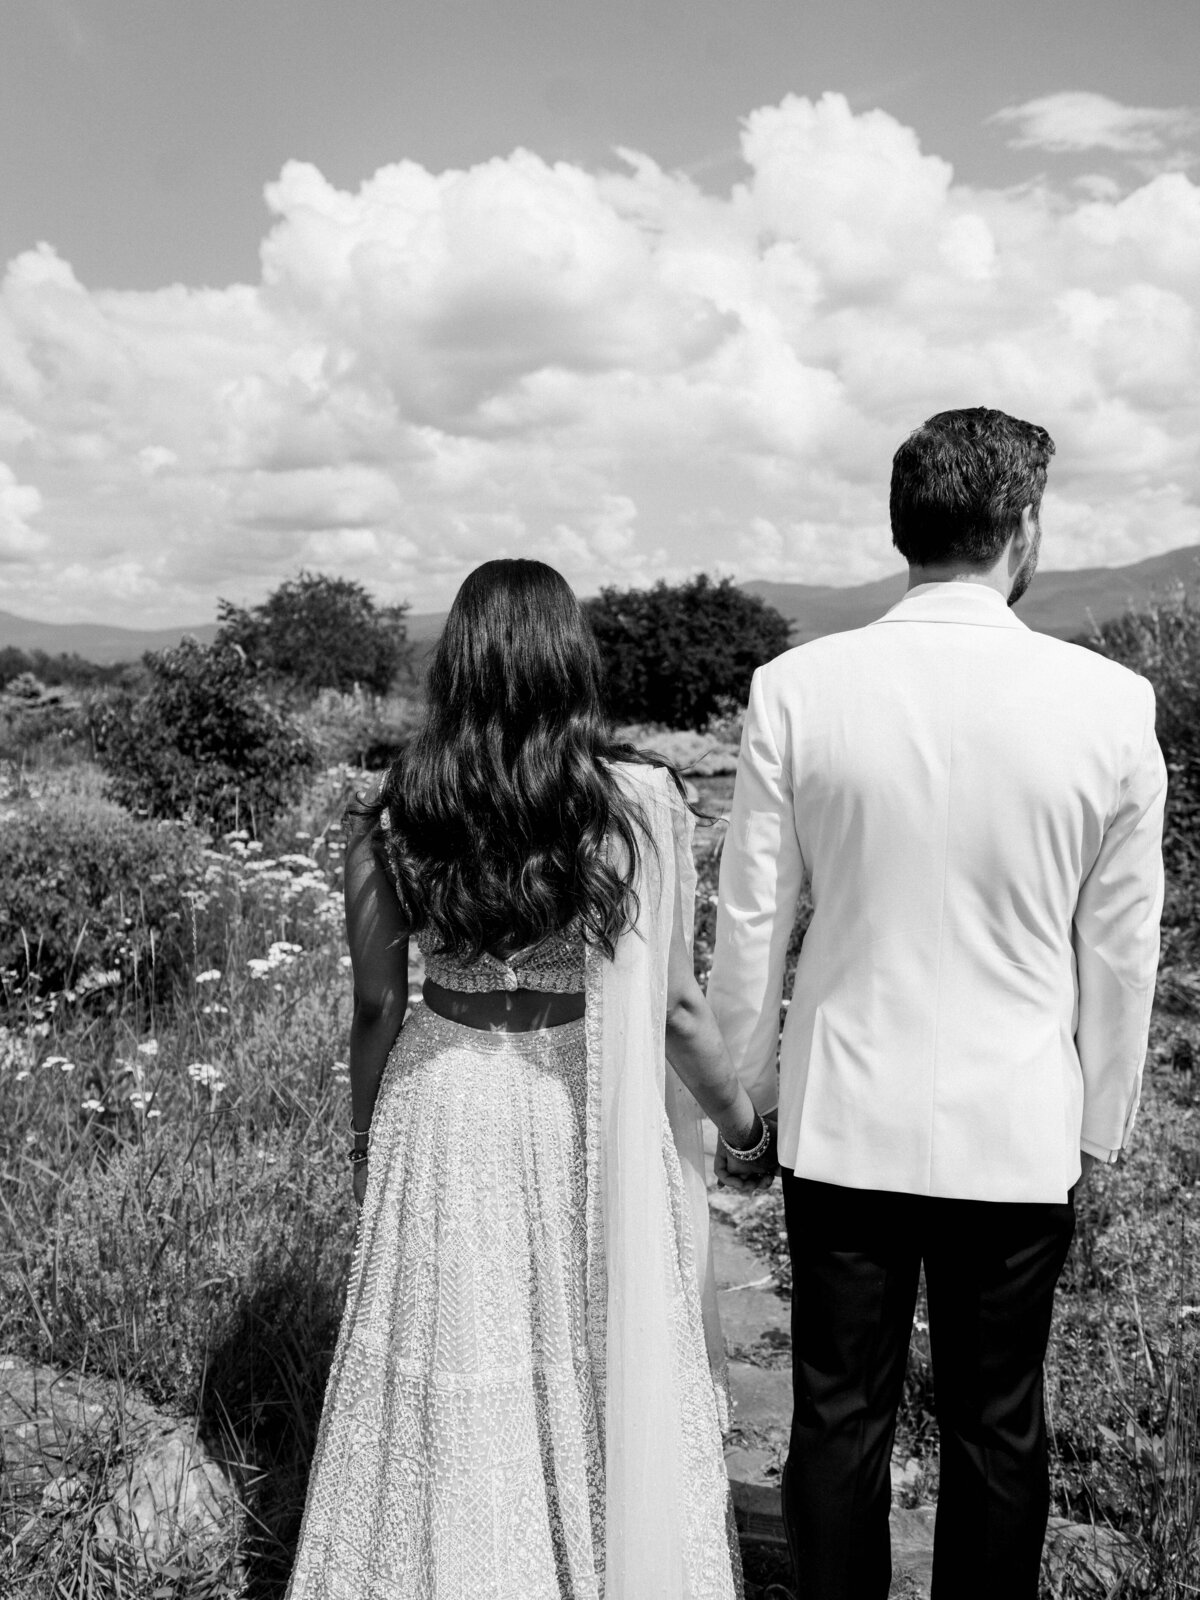 Liz Andolina Photography Destination Wedding Photographer in Italy, New York, Across the East Coast Editorial, heritage-quality images for stylish couples-728